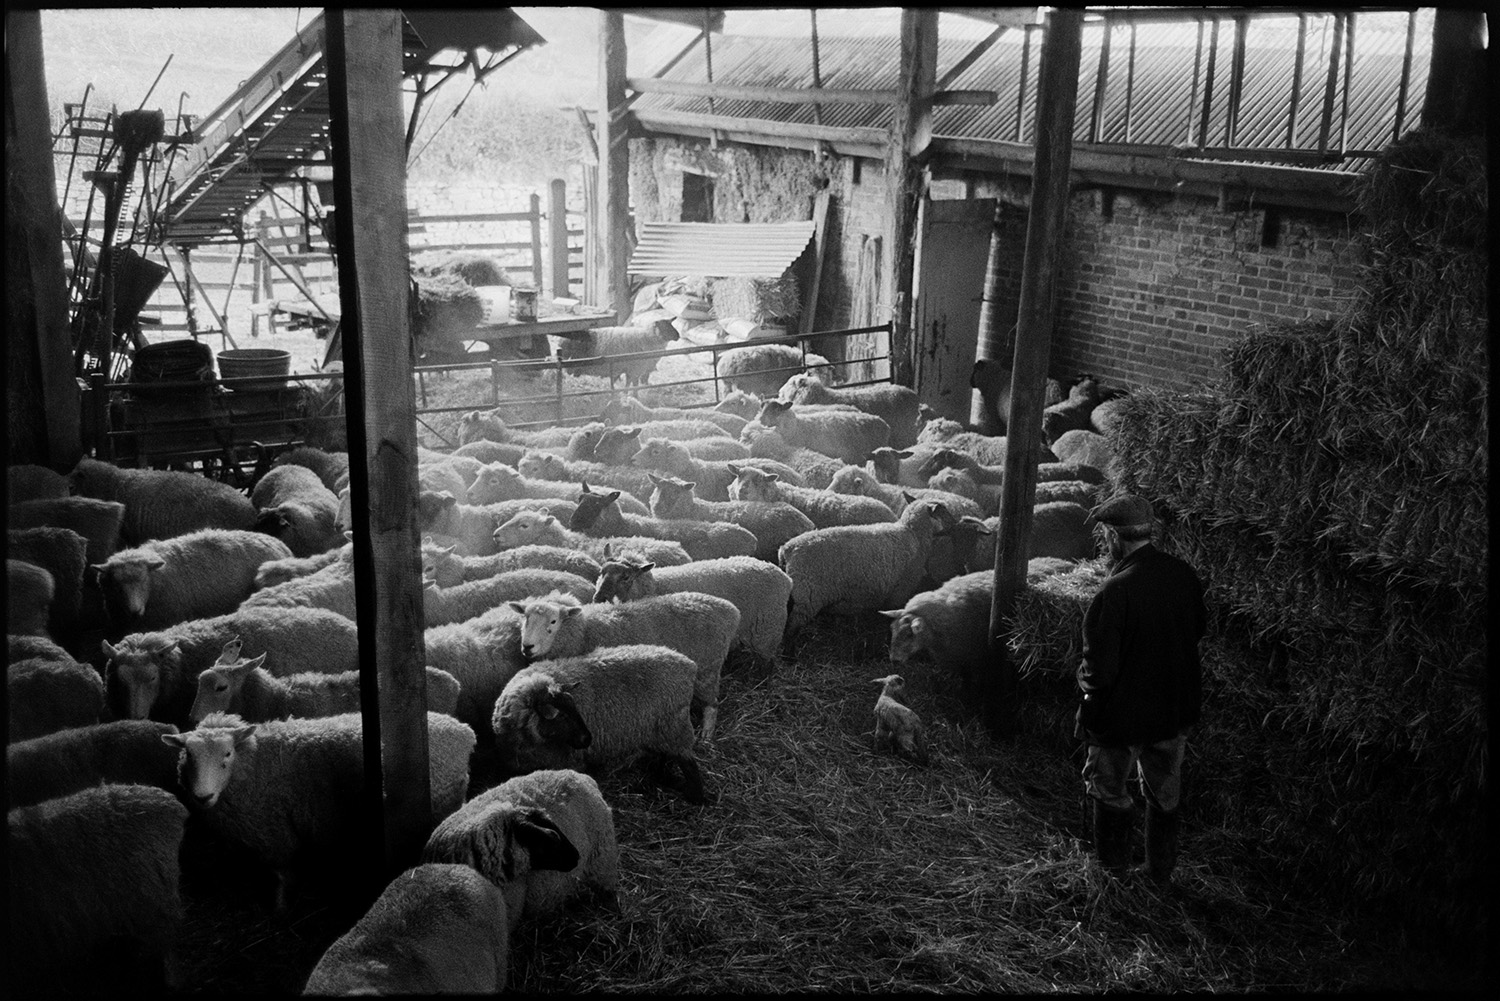 Sheep in orchard, farmyard and bottle feeding lamb in barn. 
[Alf Pugsley looking at sheep in a barn at Lower Langham, Dolton. A lamb is in the foreground by hay bales. An elevator can be seen at the far end of the barn.]